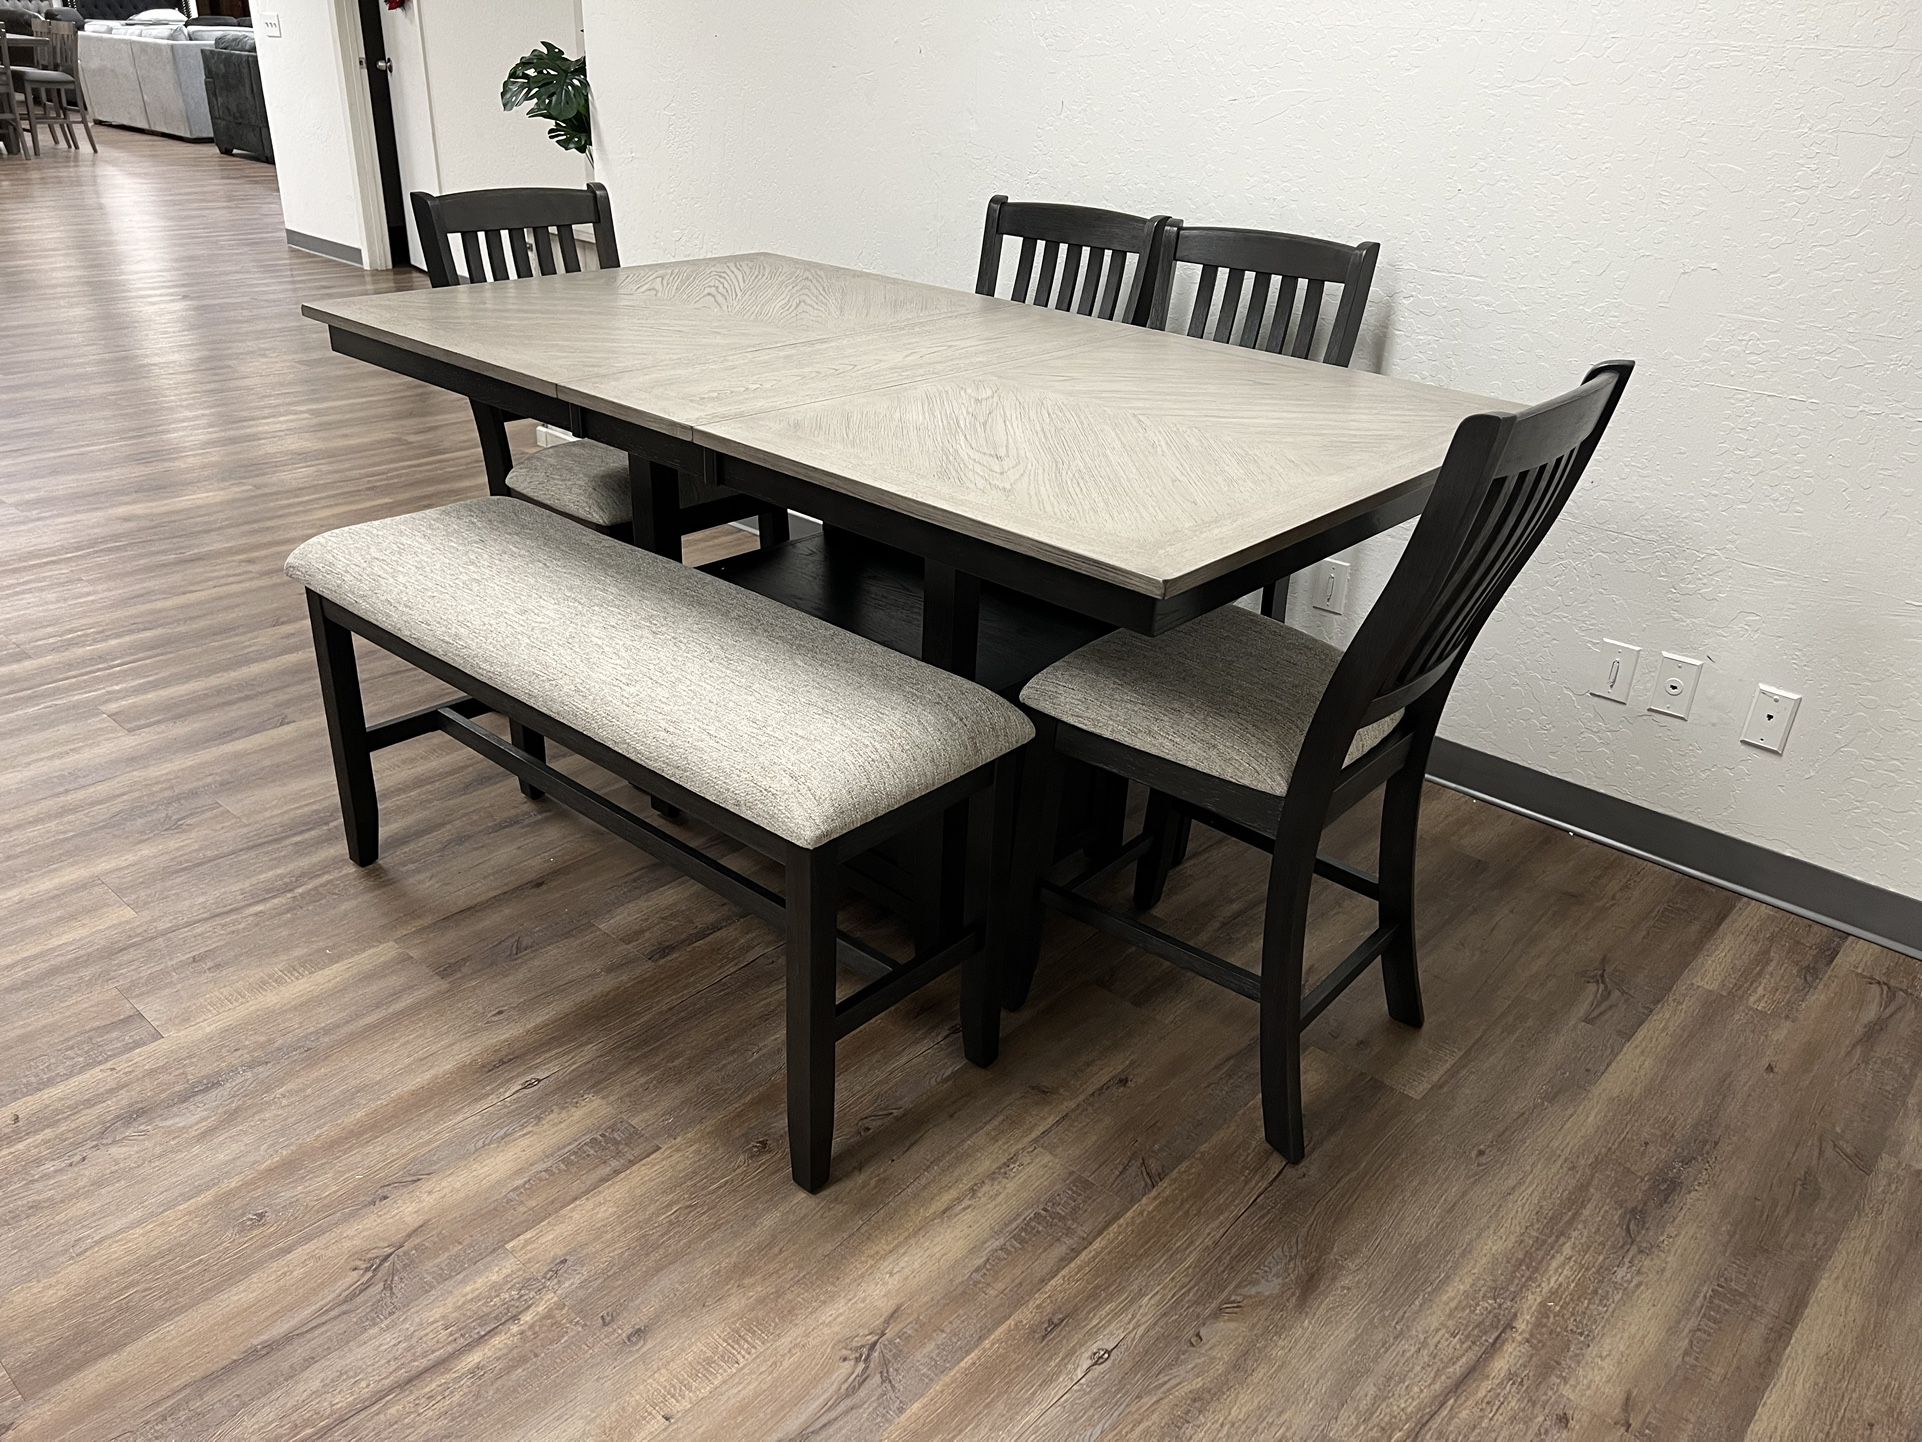 Counter Height Kitchen Table Set 